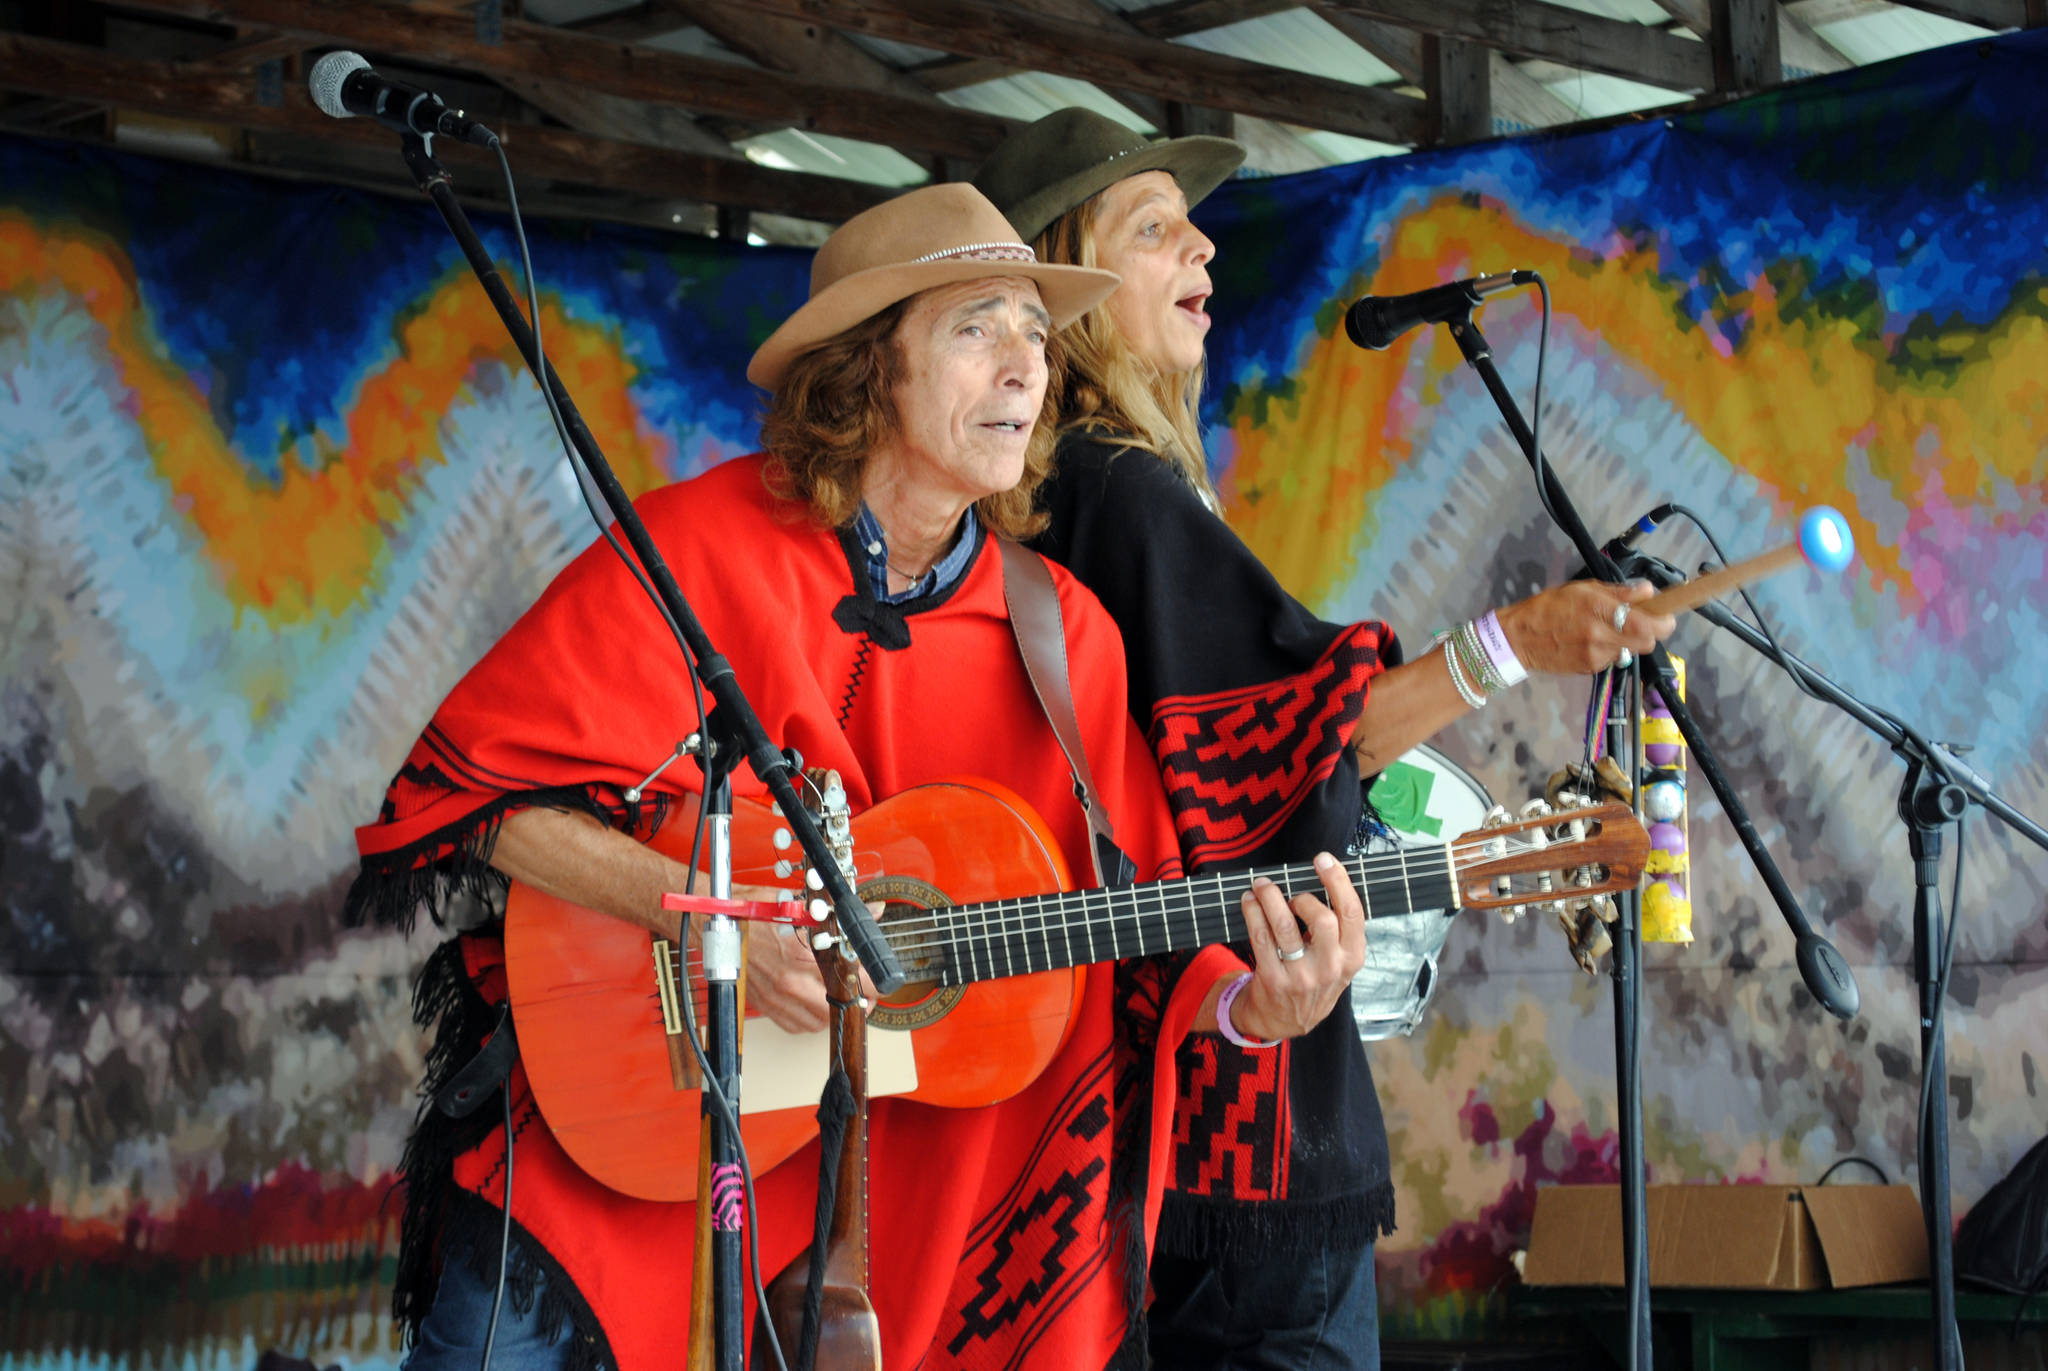 Musical duo Rio Samaya play on the River Stage during the 2017 Salmonfest in Ninilchik, Alaska on Friday, August 4, 2017. The three-day music festival concludes on Sunday night. (Photo by Kat Sorensen/Peninsula Clarion)